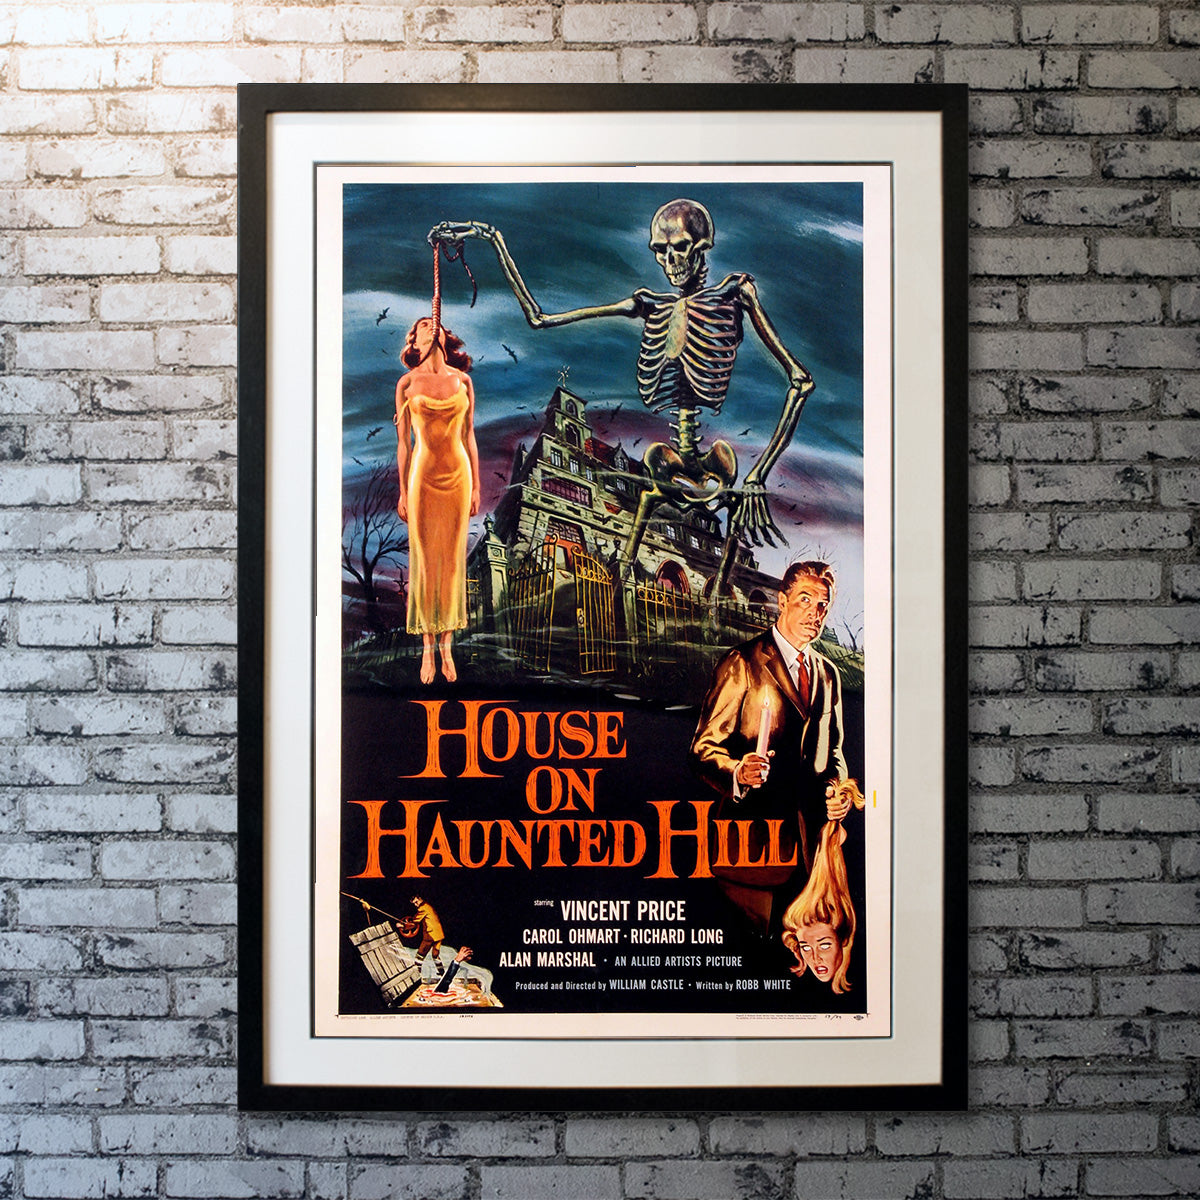 Original Movie Poster of House On Haunted Hill (1959)